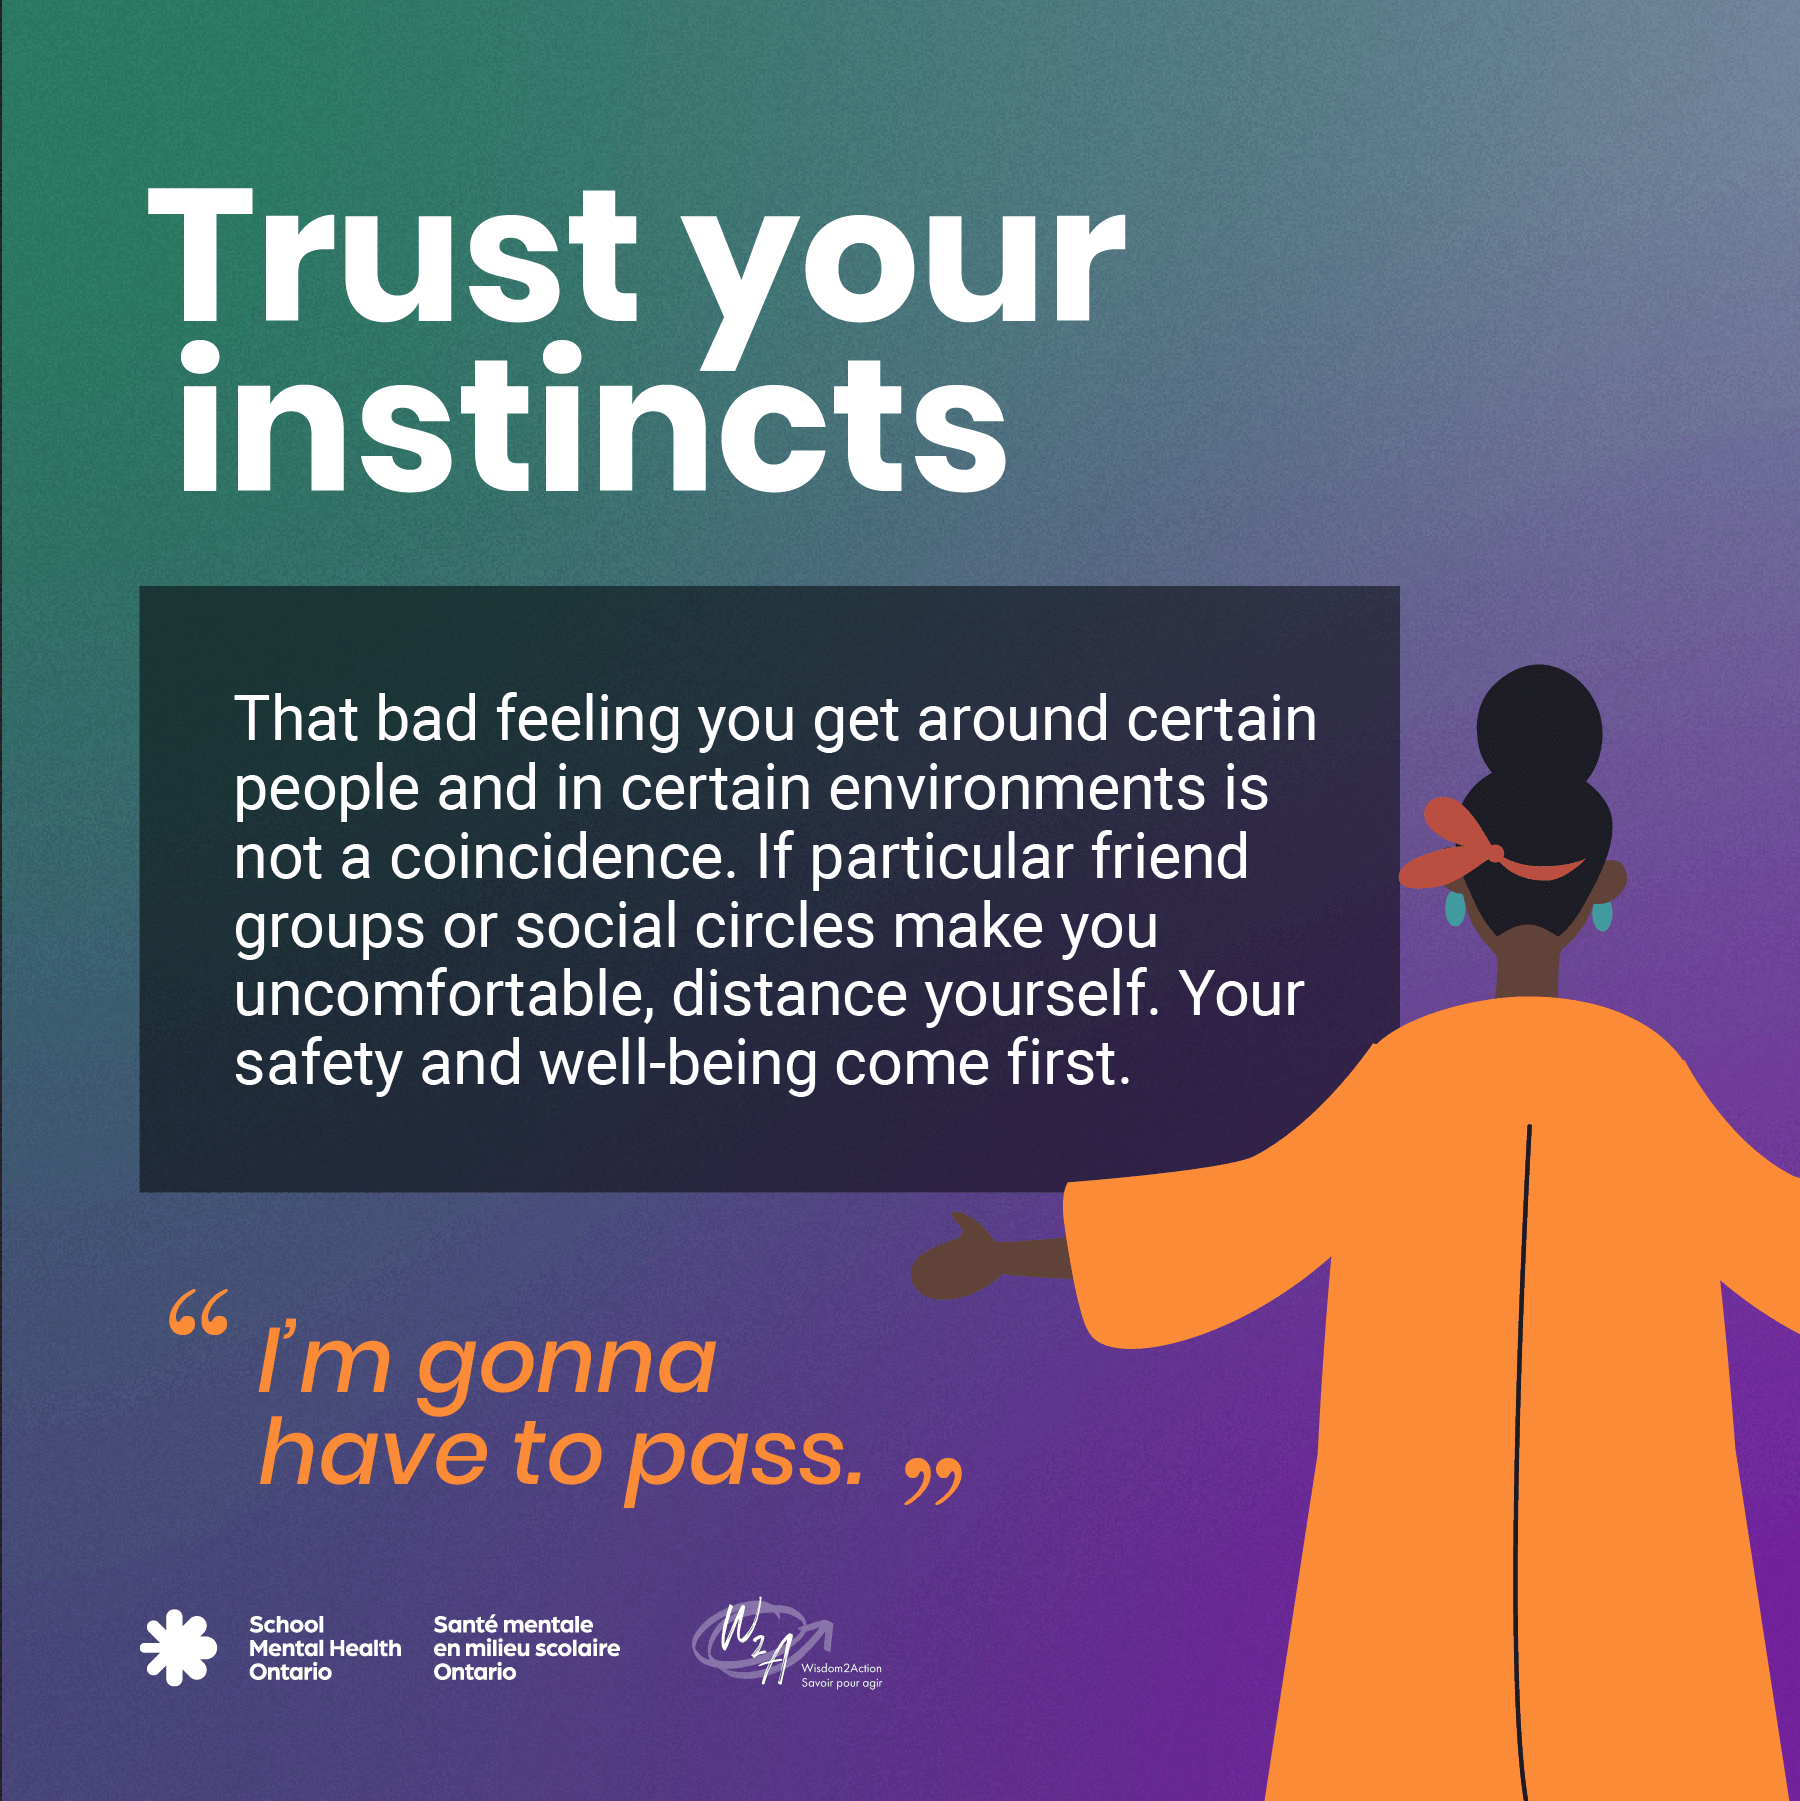 Trust your instincts - see full description of image below.